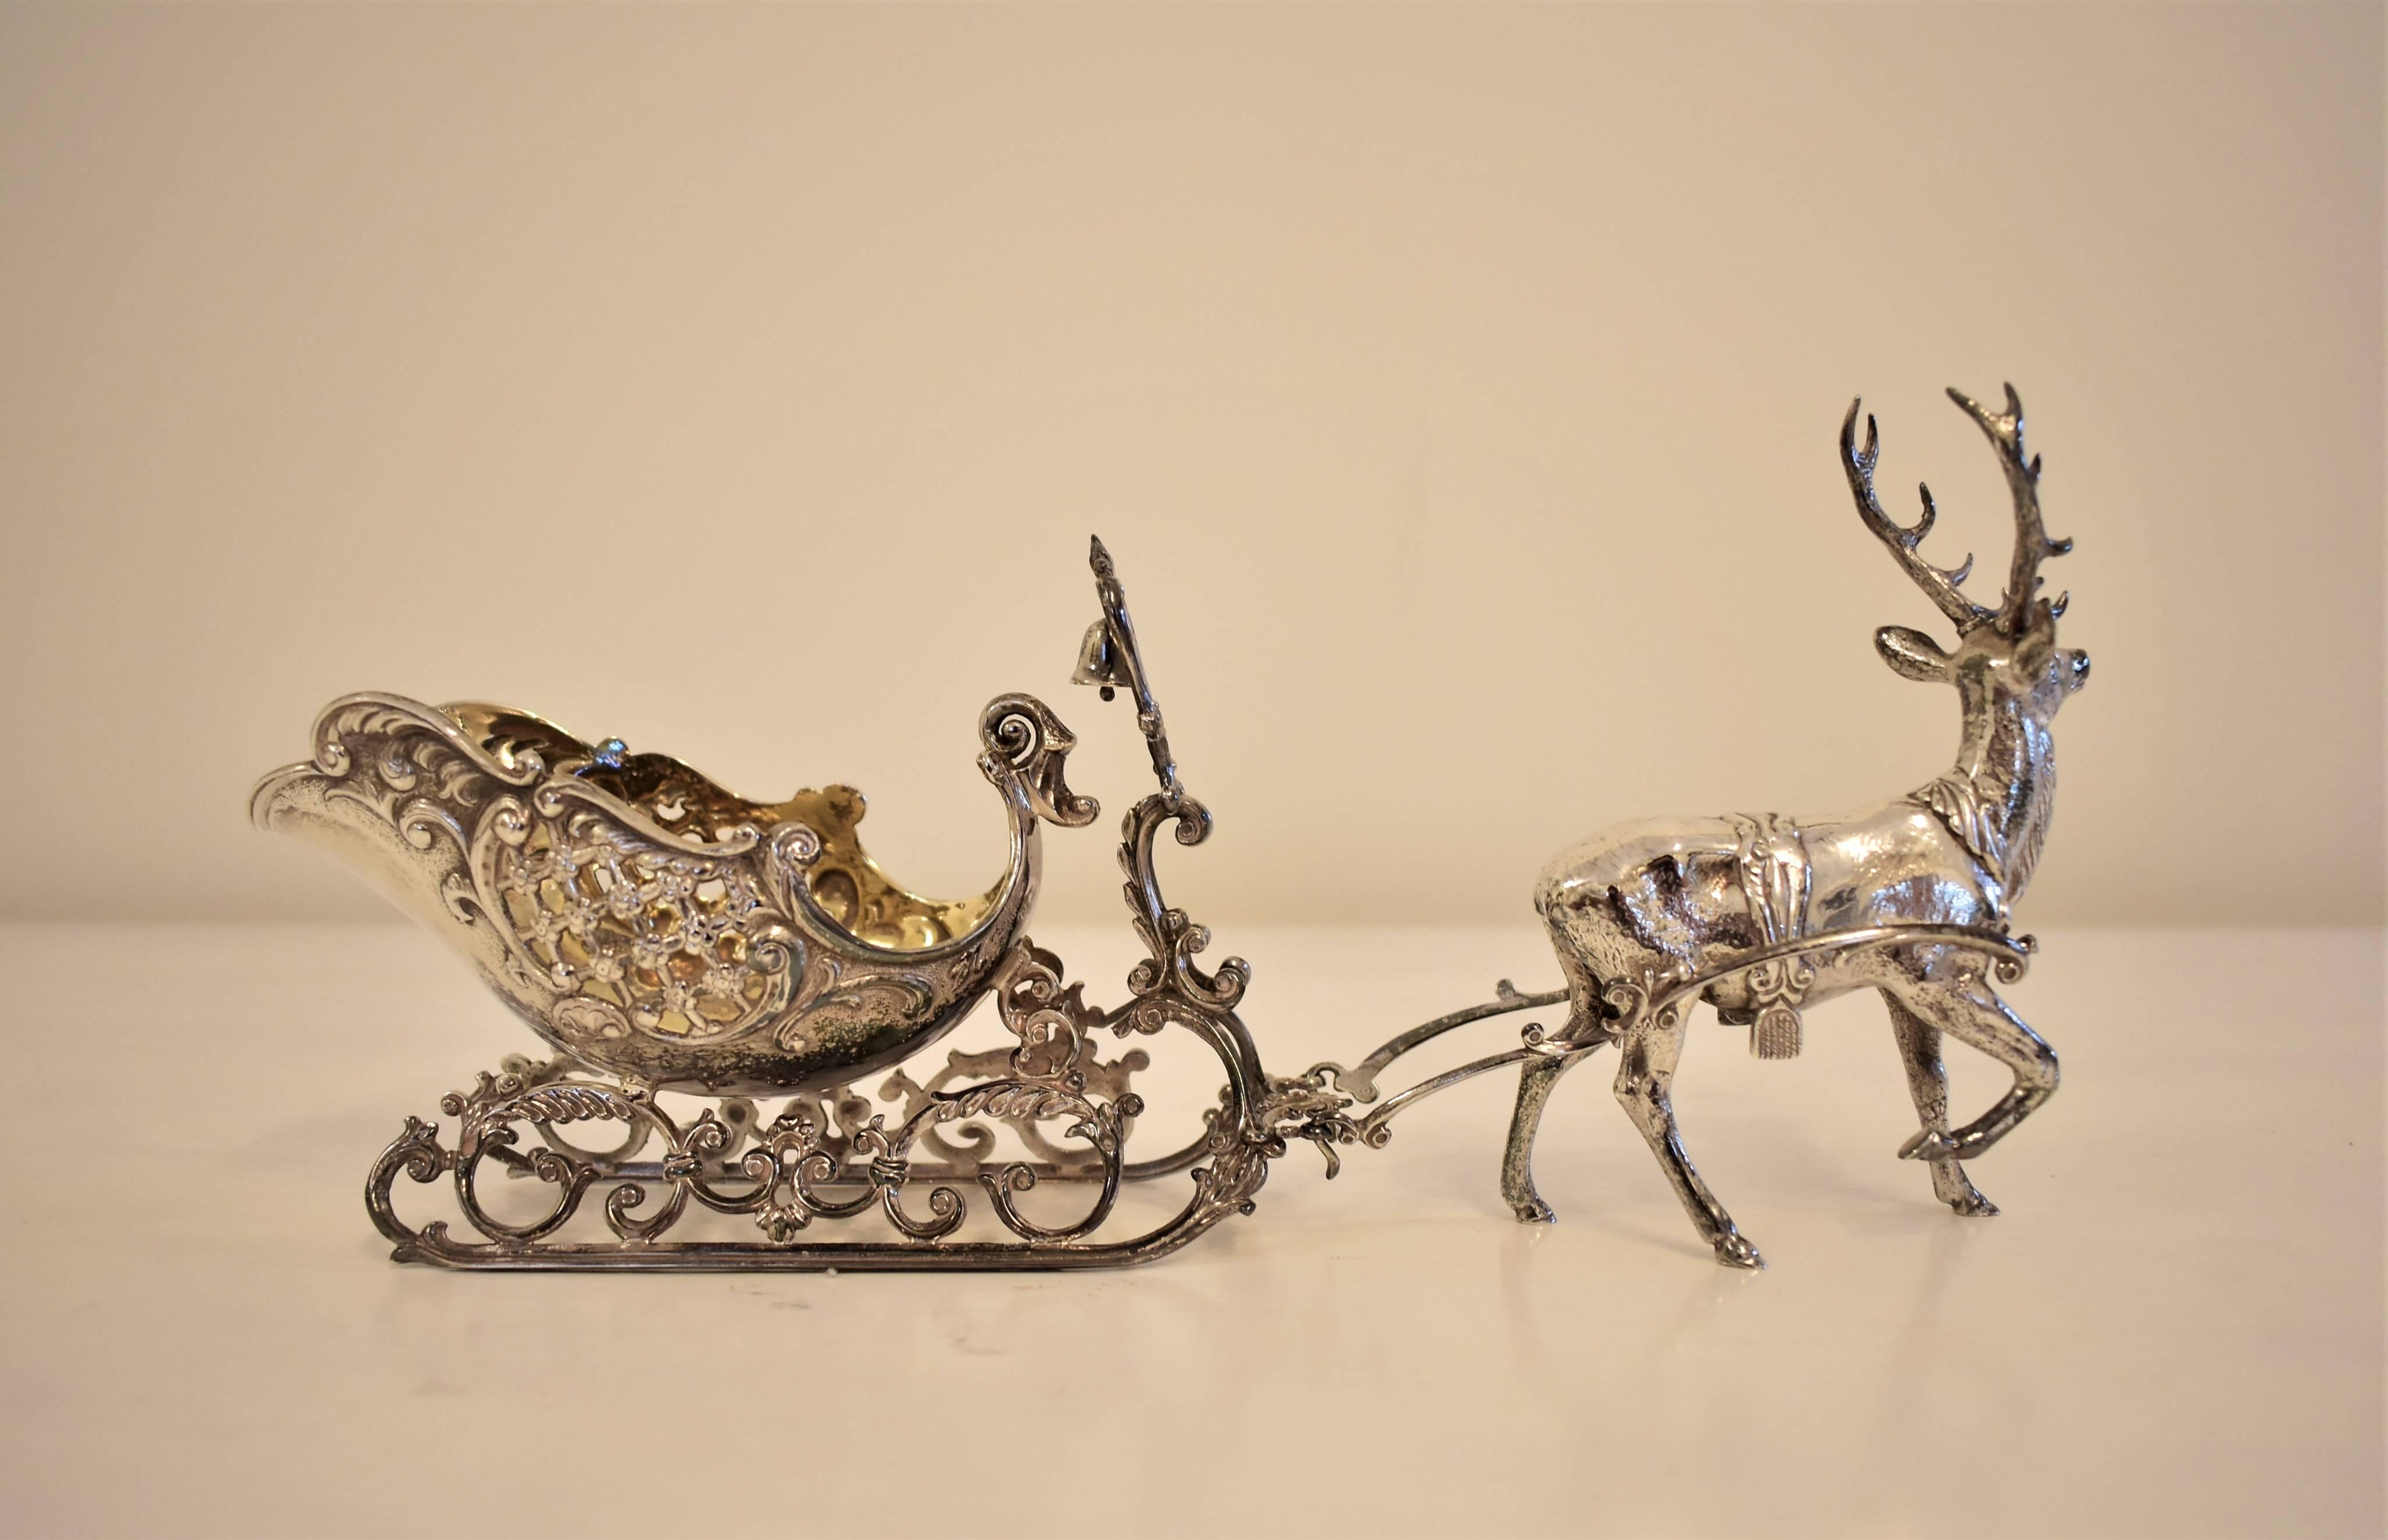 A delicate detailed silver sledge or sleigh complete with functioning bell drawn by a reindeer in walking pose. The interior of the sleigh is gilded. Intricately detailed and ornate with finely hand chased finishings to give very realistic feel.